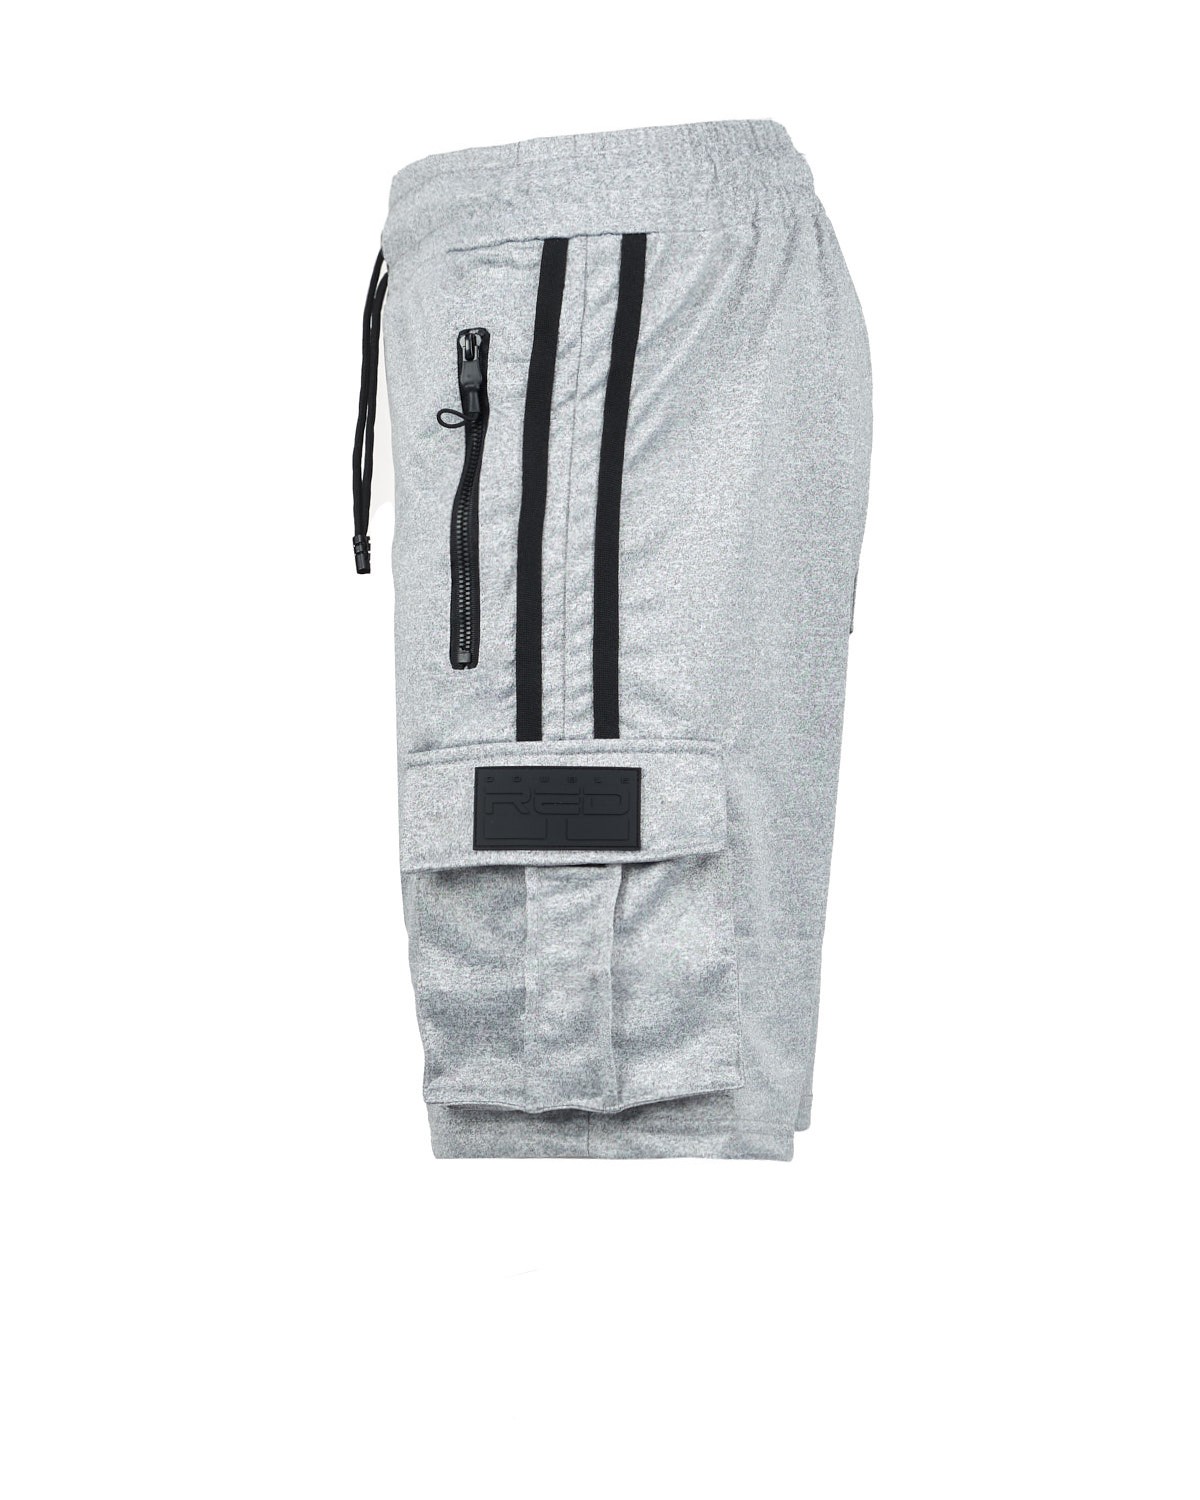 SPORT IS YOUR GANG Shorts Silver